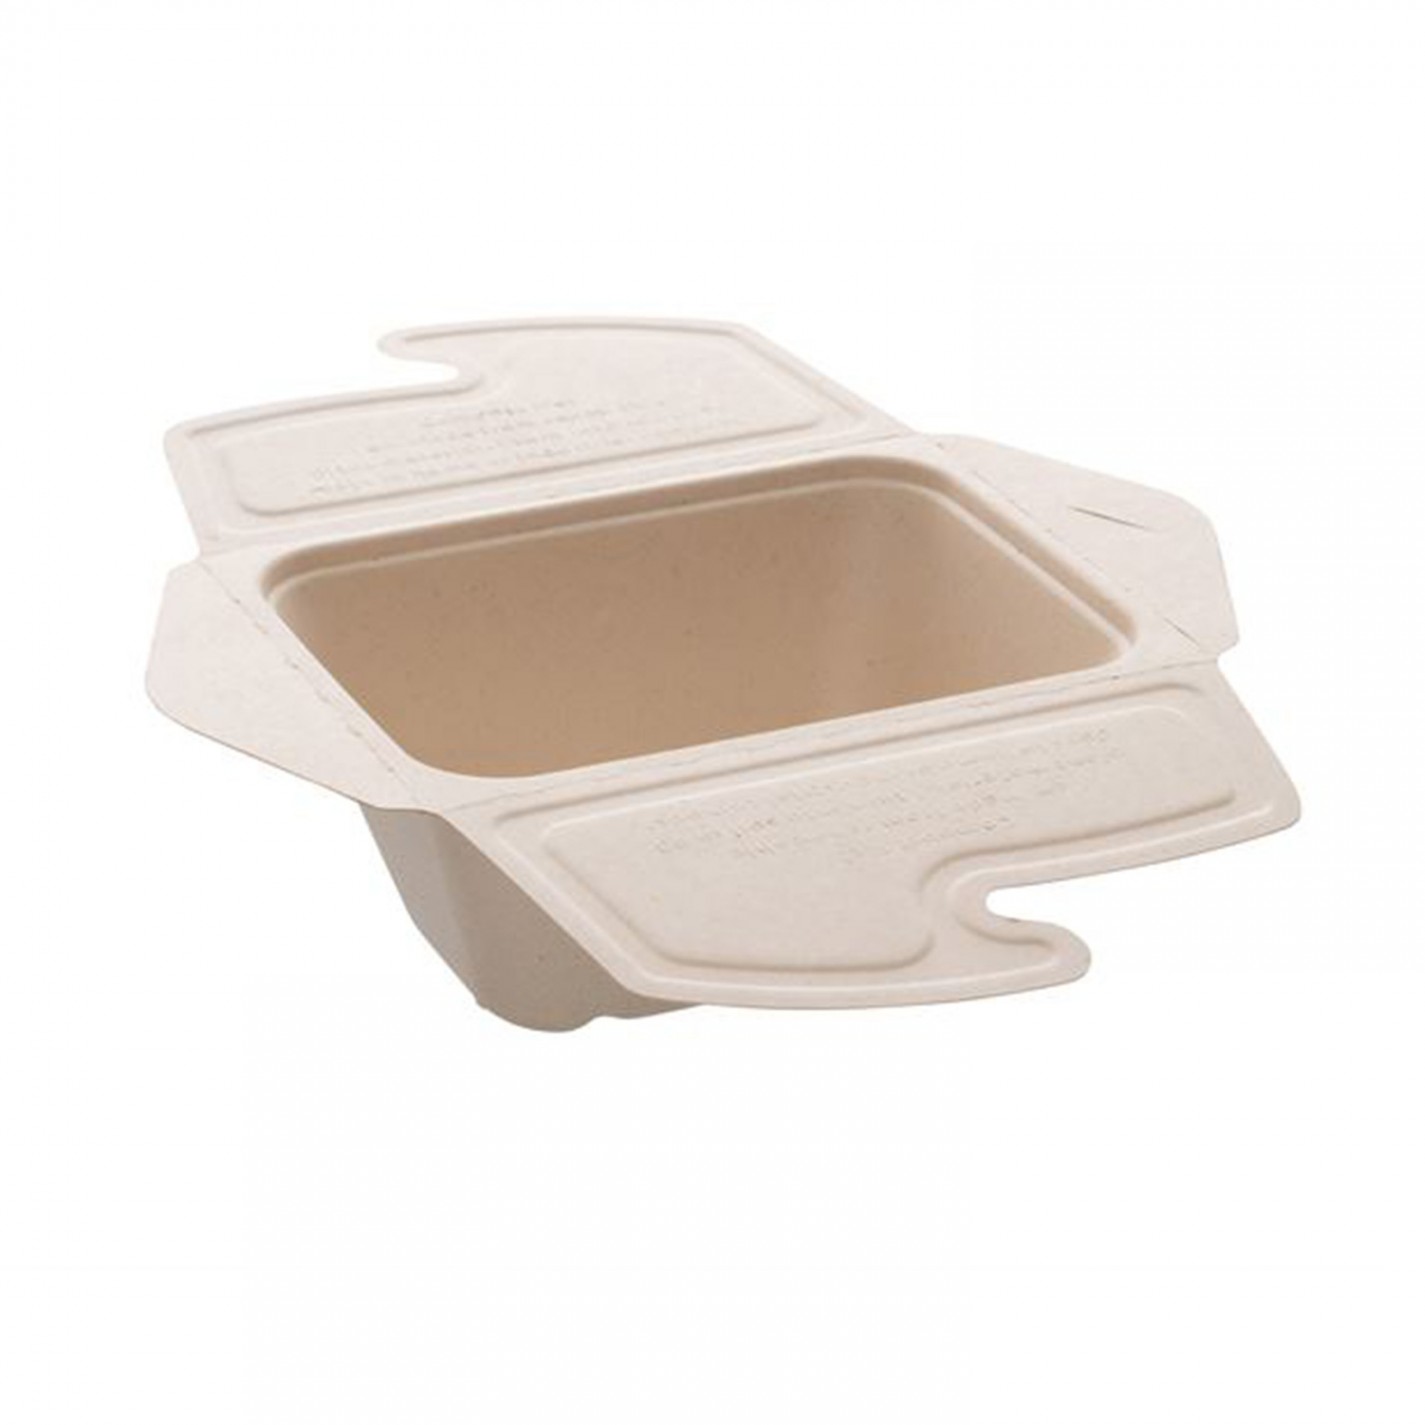 BOITE CANNE A SUCRE MEAL BOX TO GO 2CASES 500/300ML 21X15XH7CM/150